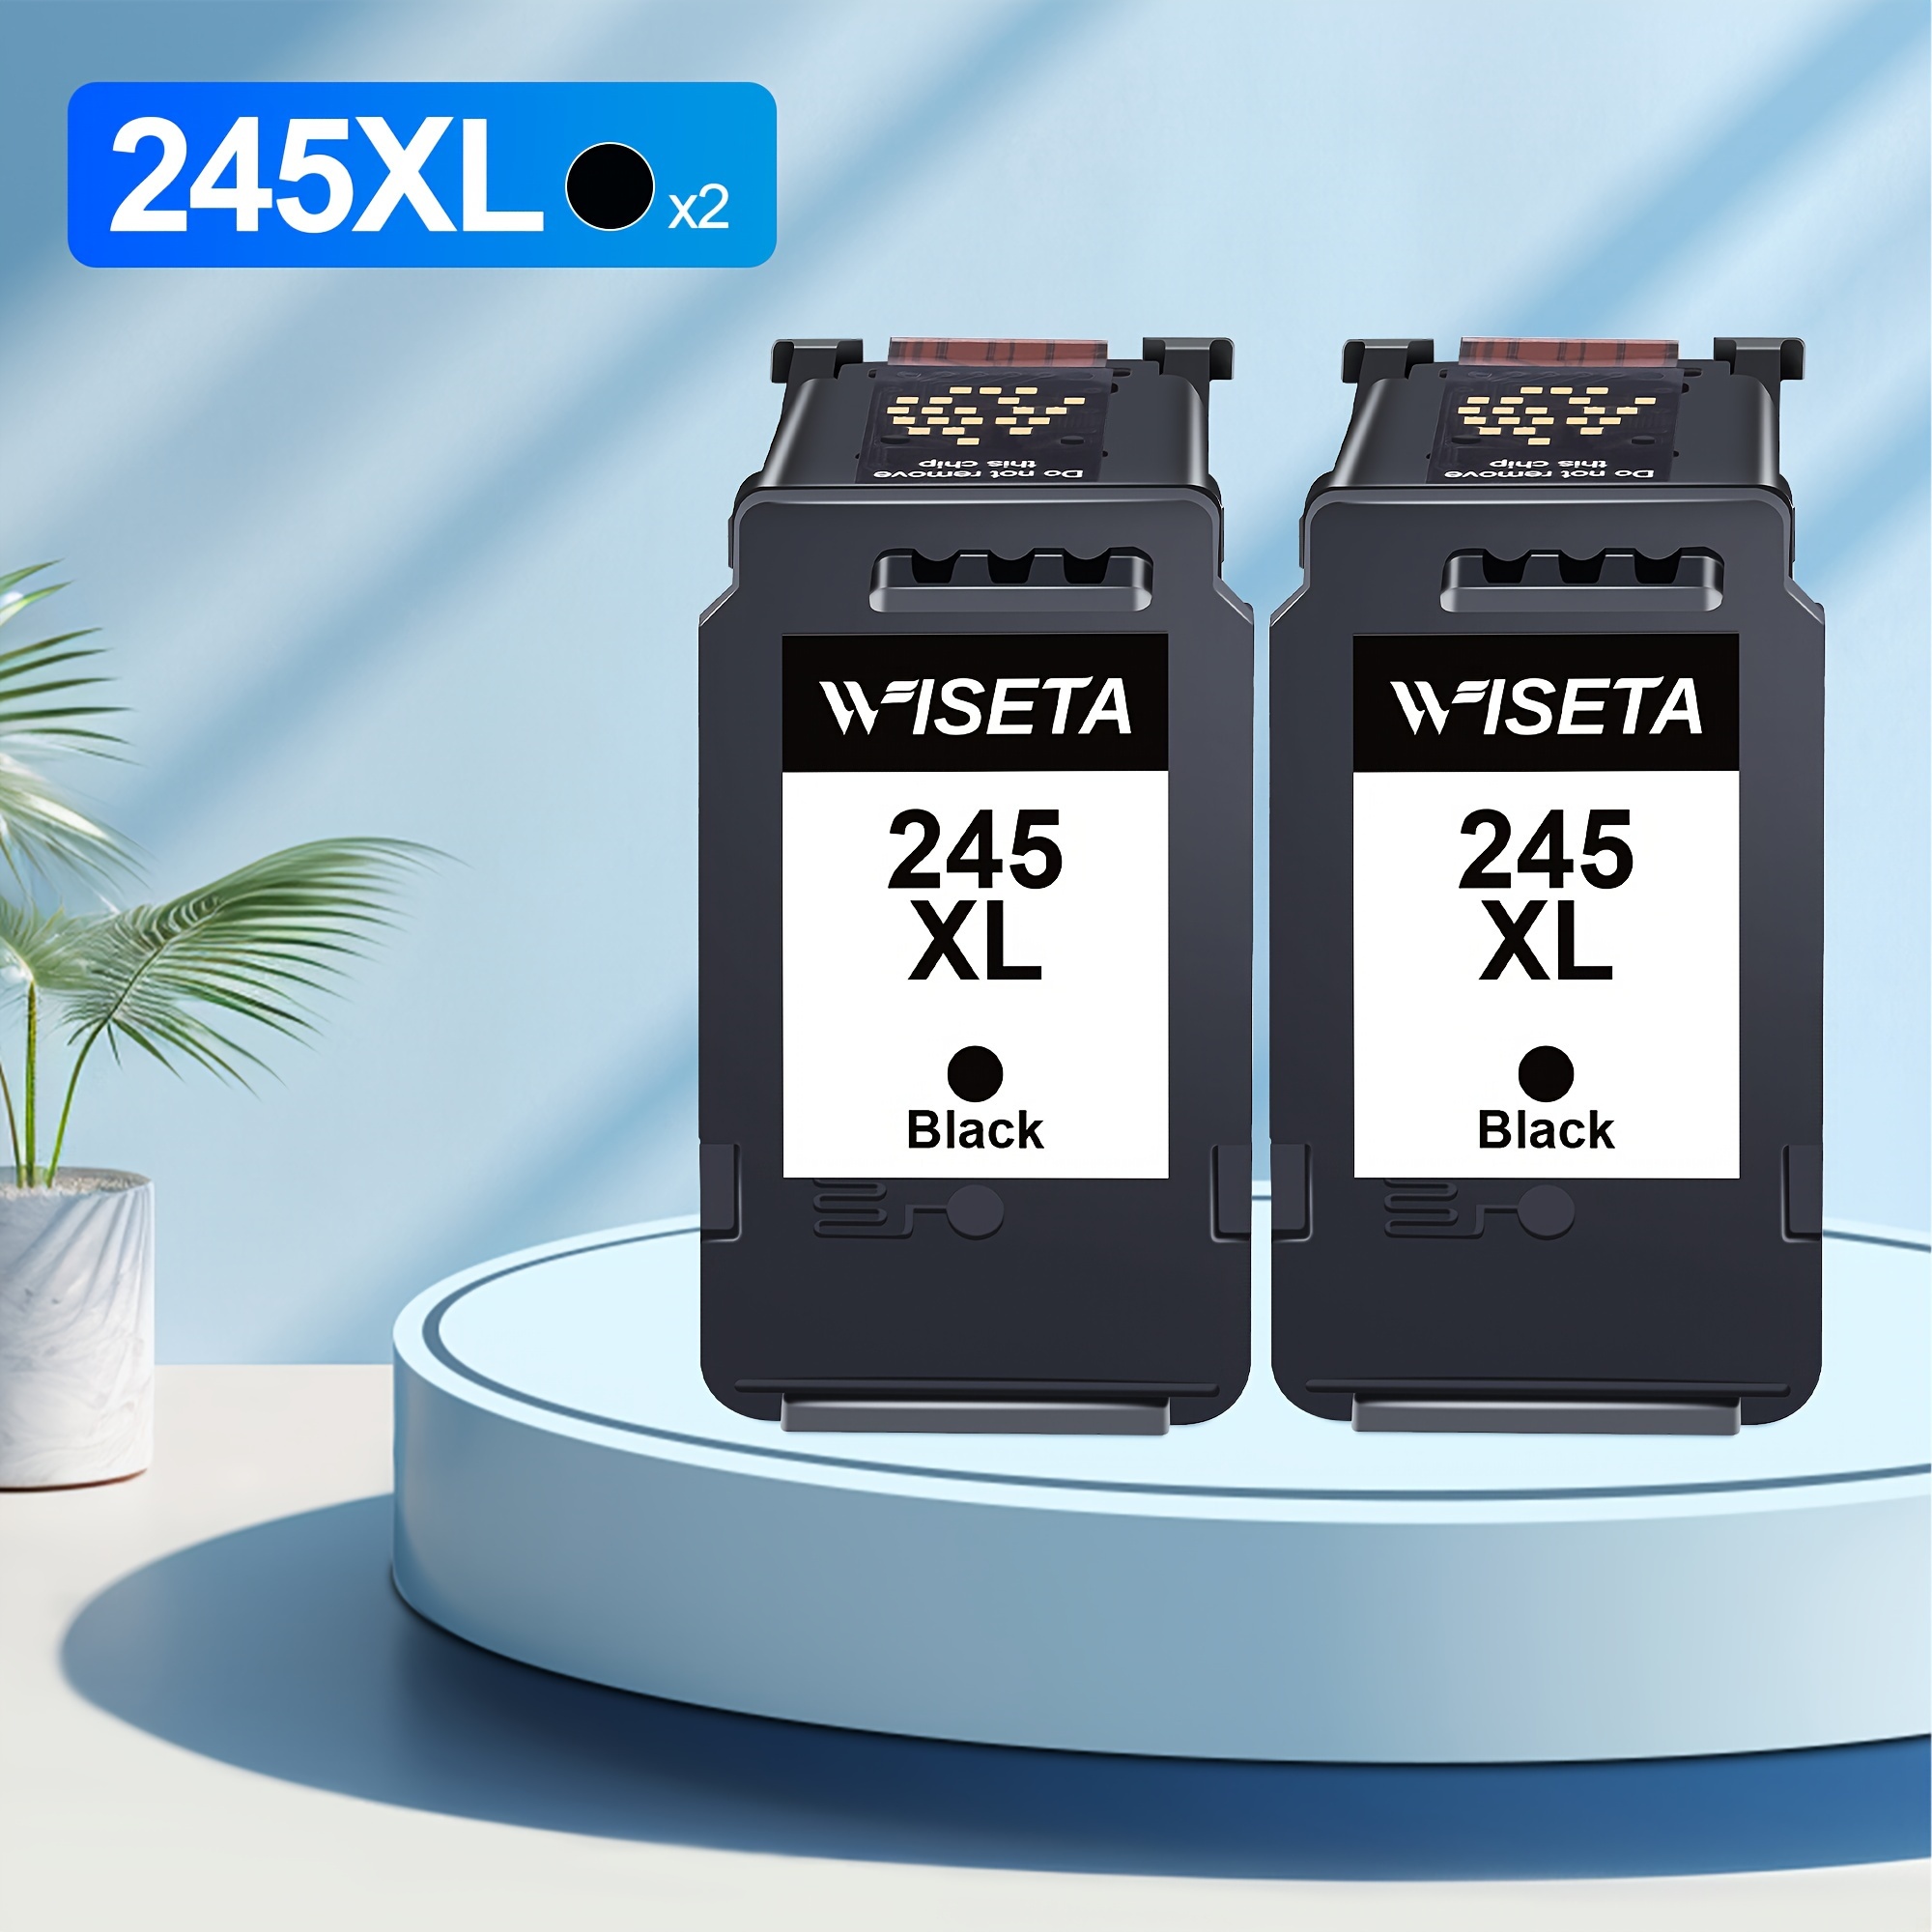 

2 Black 245xl Ink Cartridges Replacement For 245xl 246xl Works With Brother Pixma Mx492 Mx490 Mg2420 Mg2520 Mg2522 Mg2920 Mg2922 Mg3022 Mg3029 Ip2820 Printers